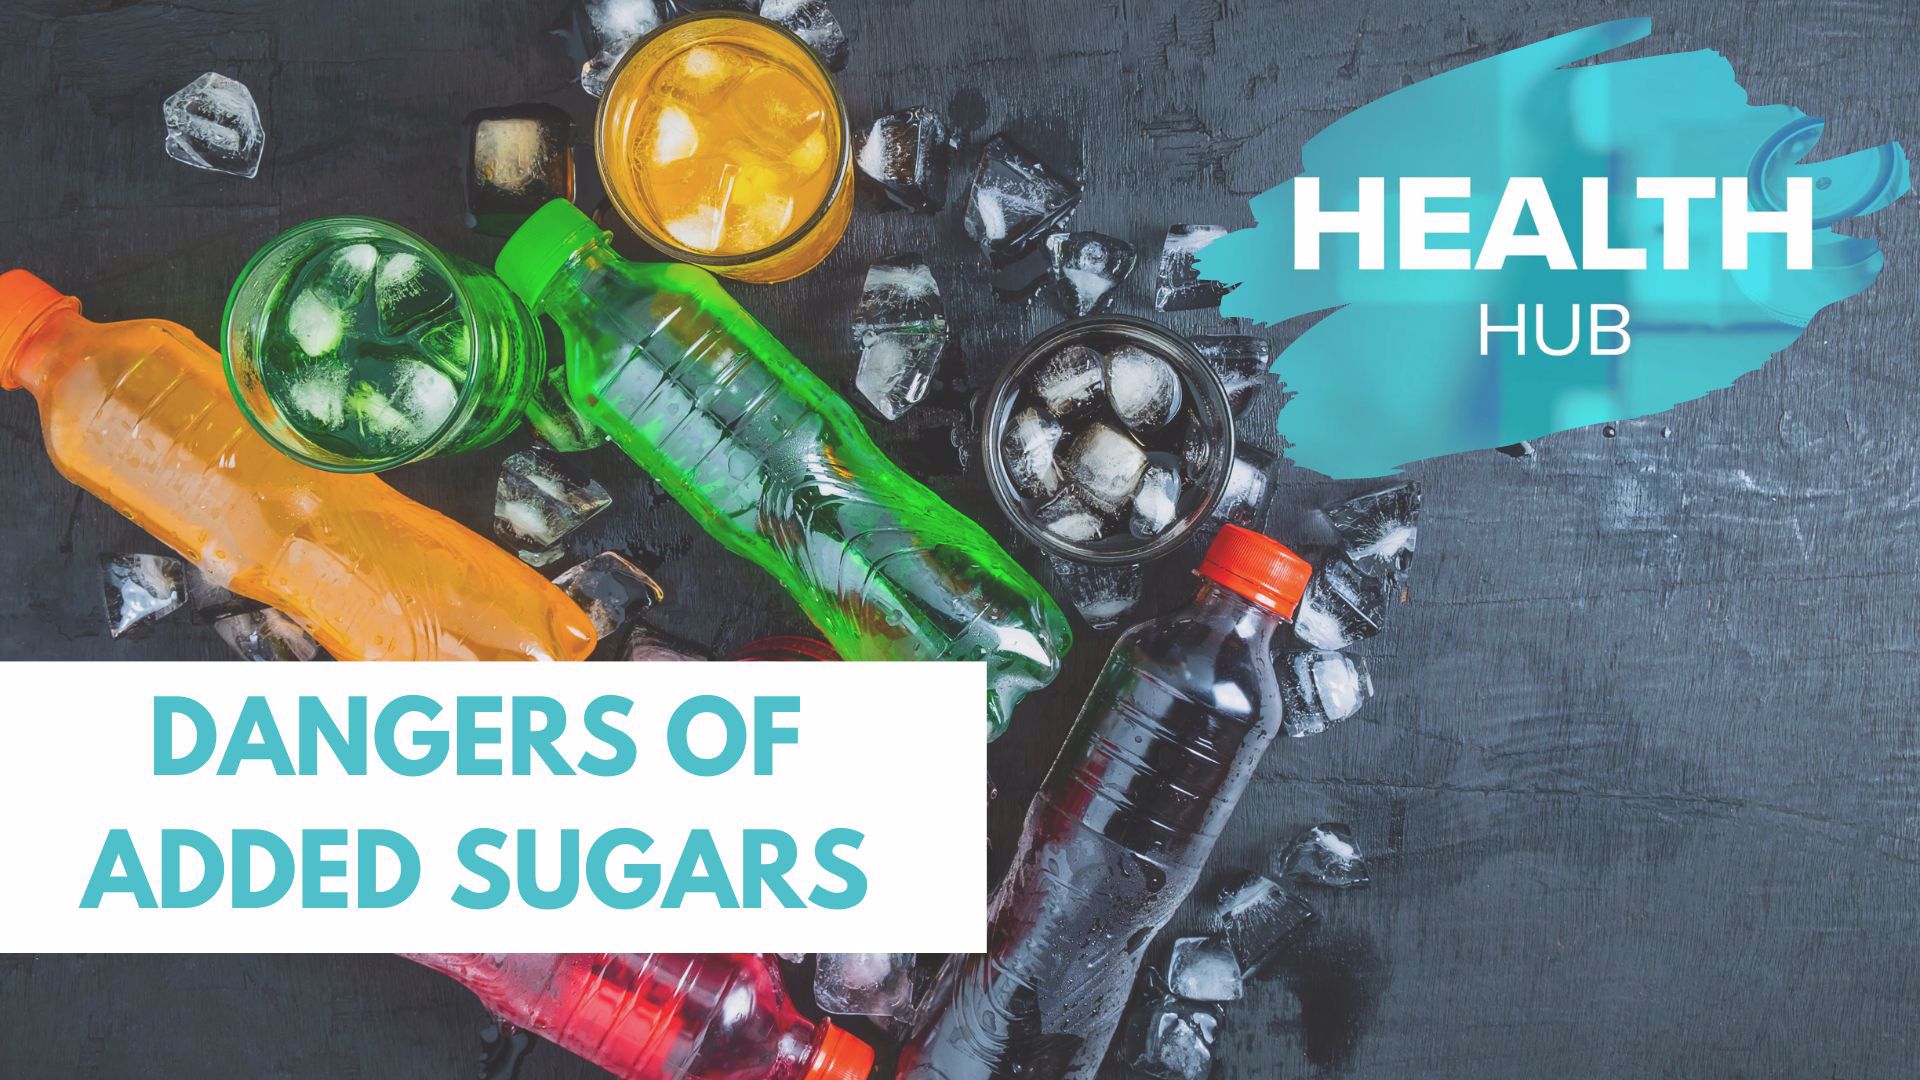 Added sugars can have dangerous impacts on our health. From what you need to look for on nutrition labels to healthier alternatives.